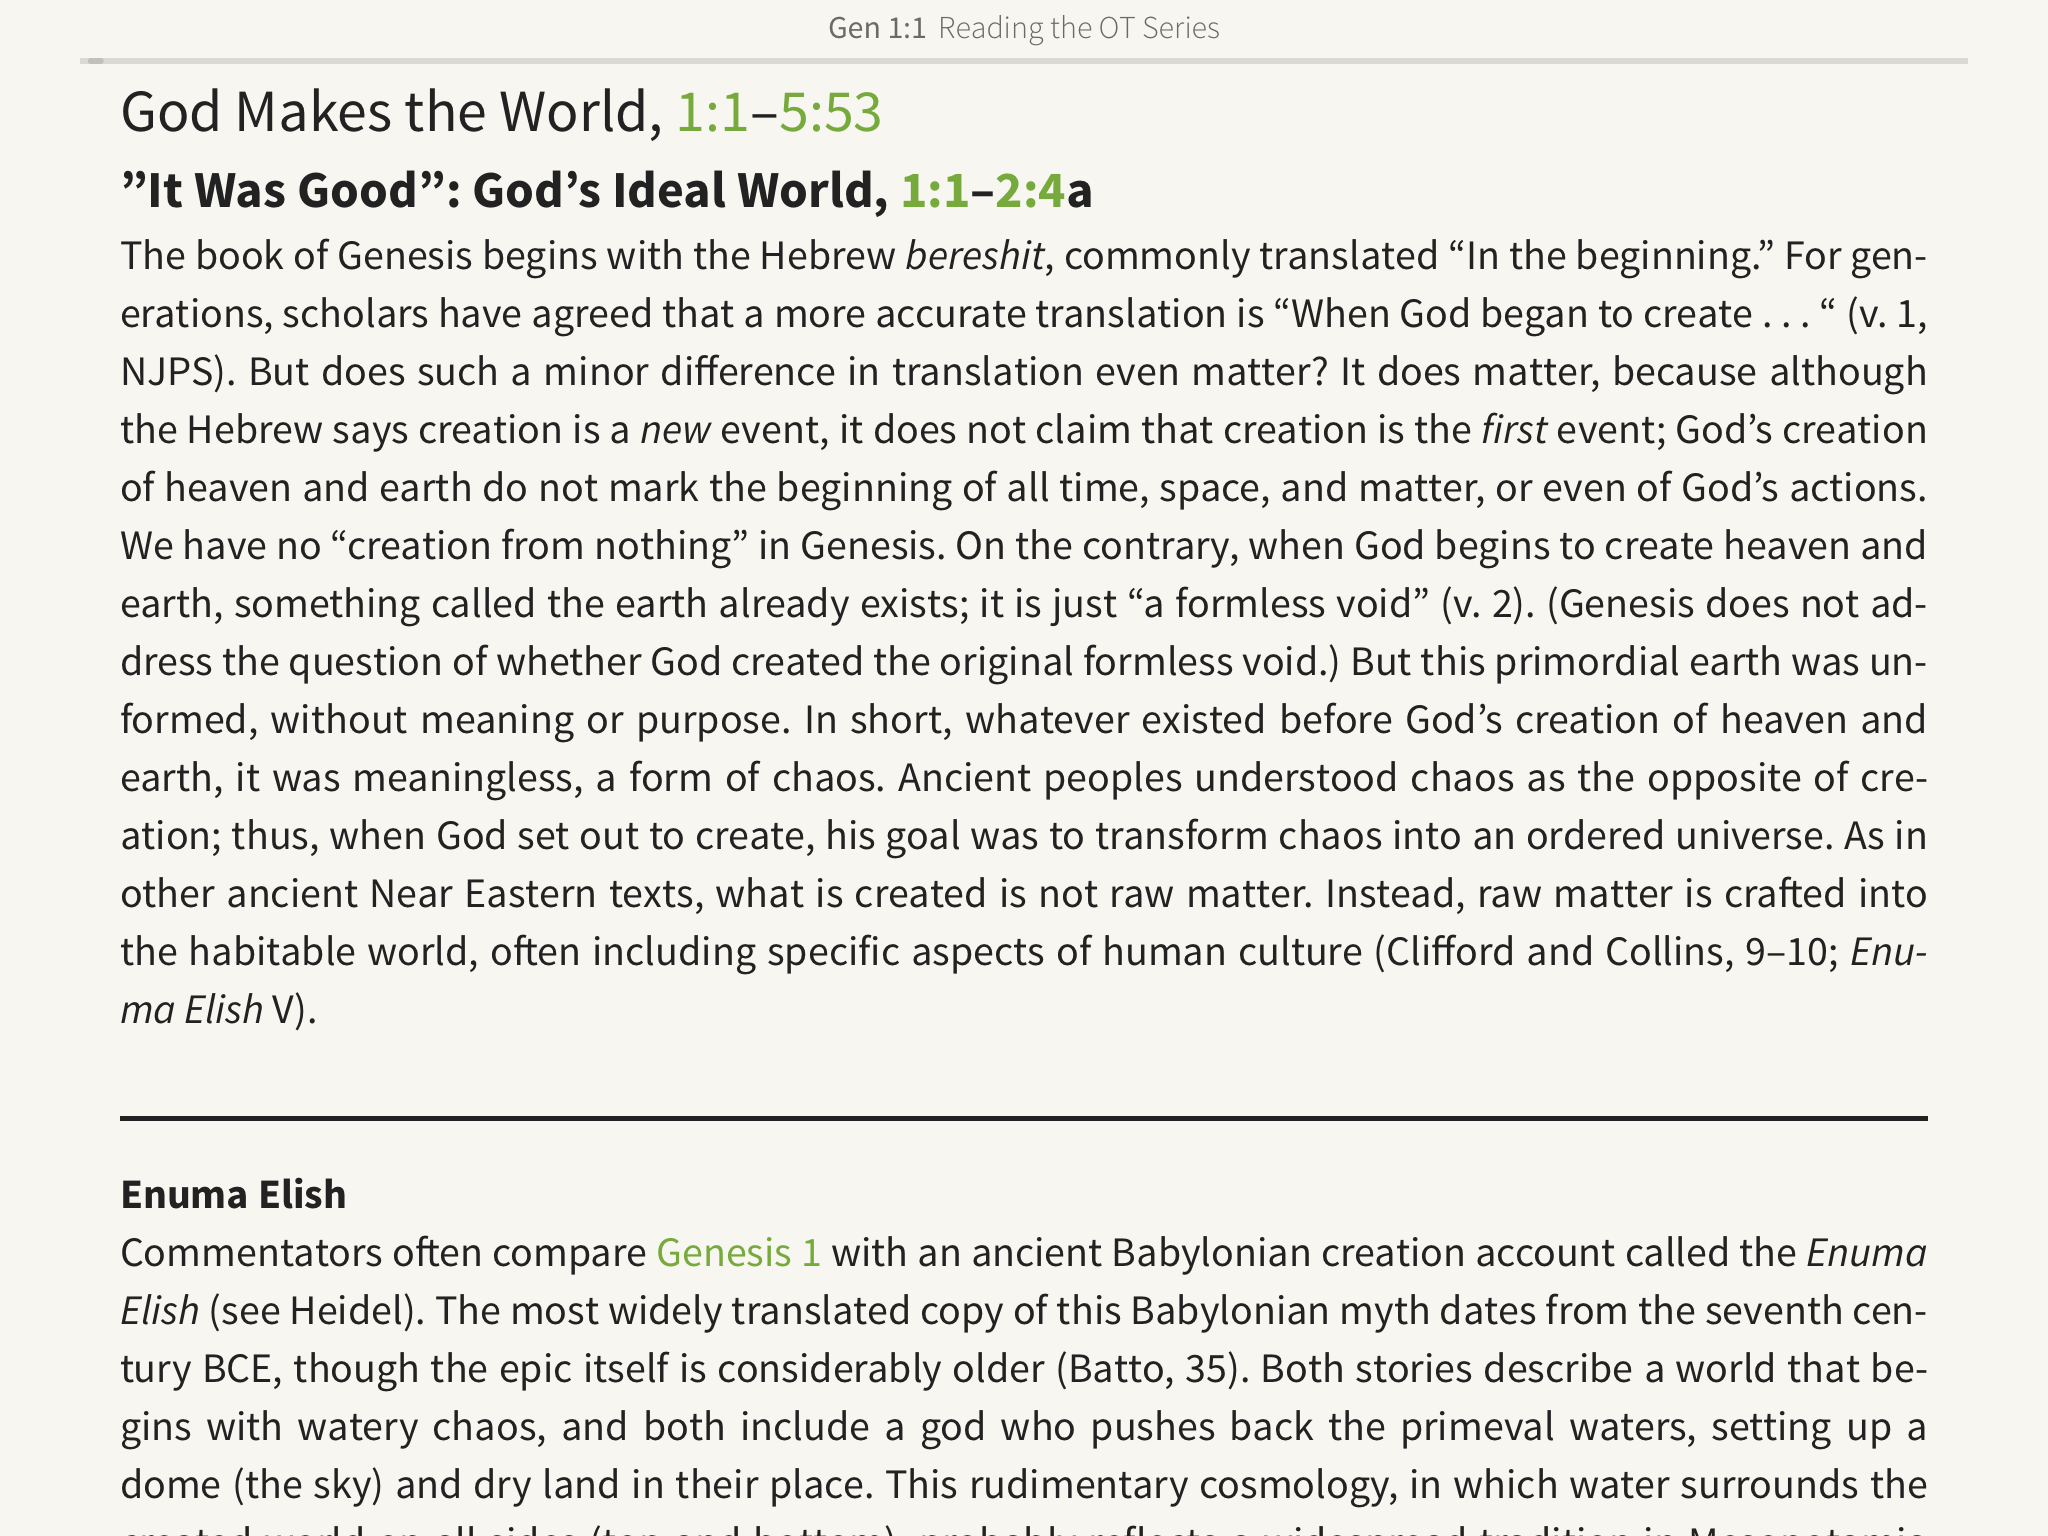 Reading the Old Testament: Genesis in the Olive Tree Bible App commentary